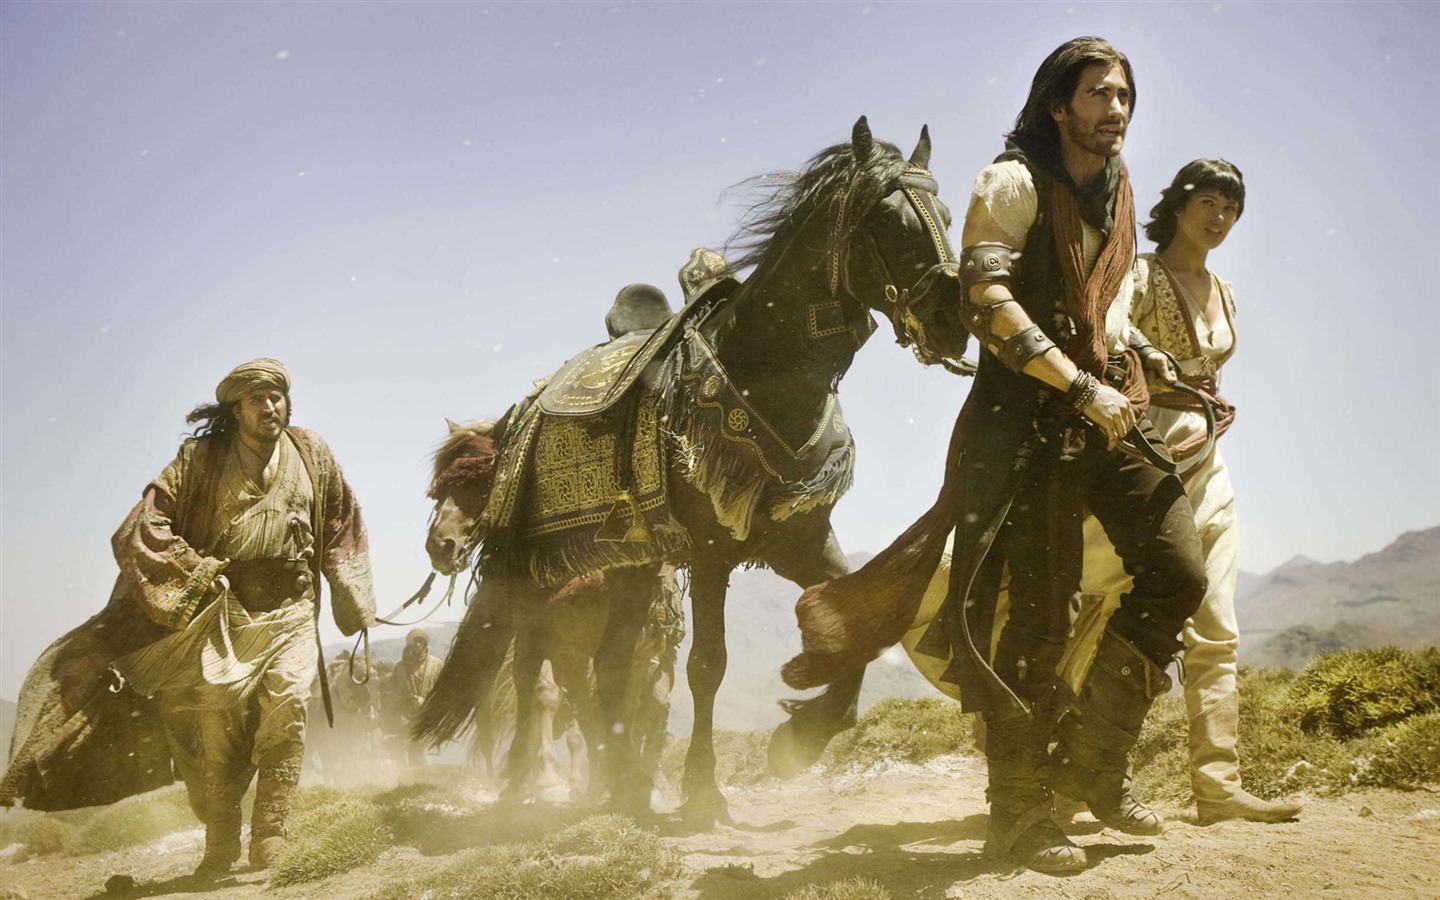 Prince of Persia The Sands of Time wallpaper #19 - 1440x900